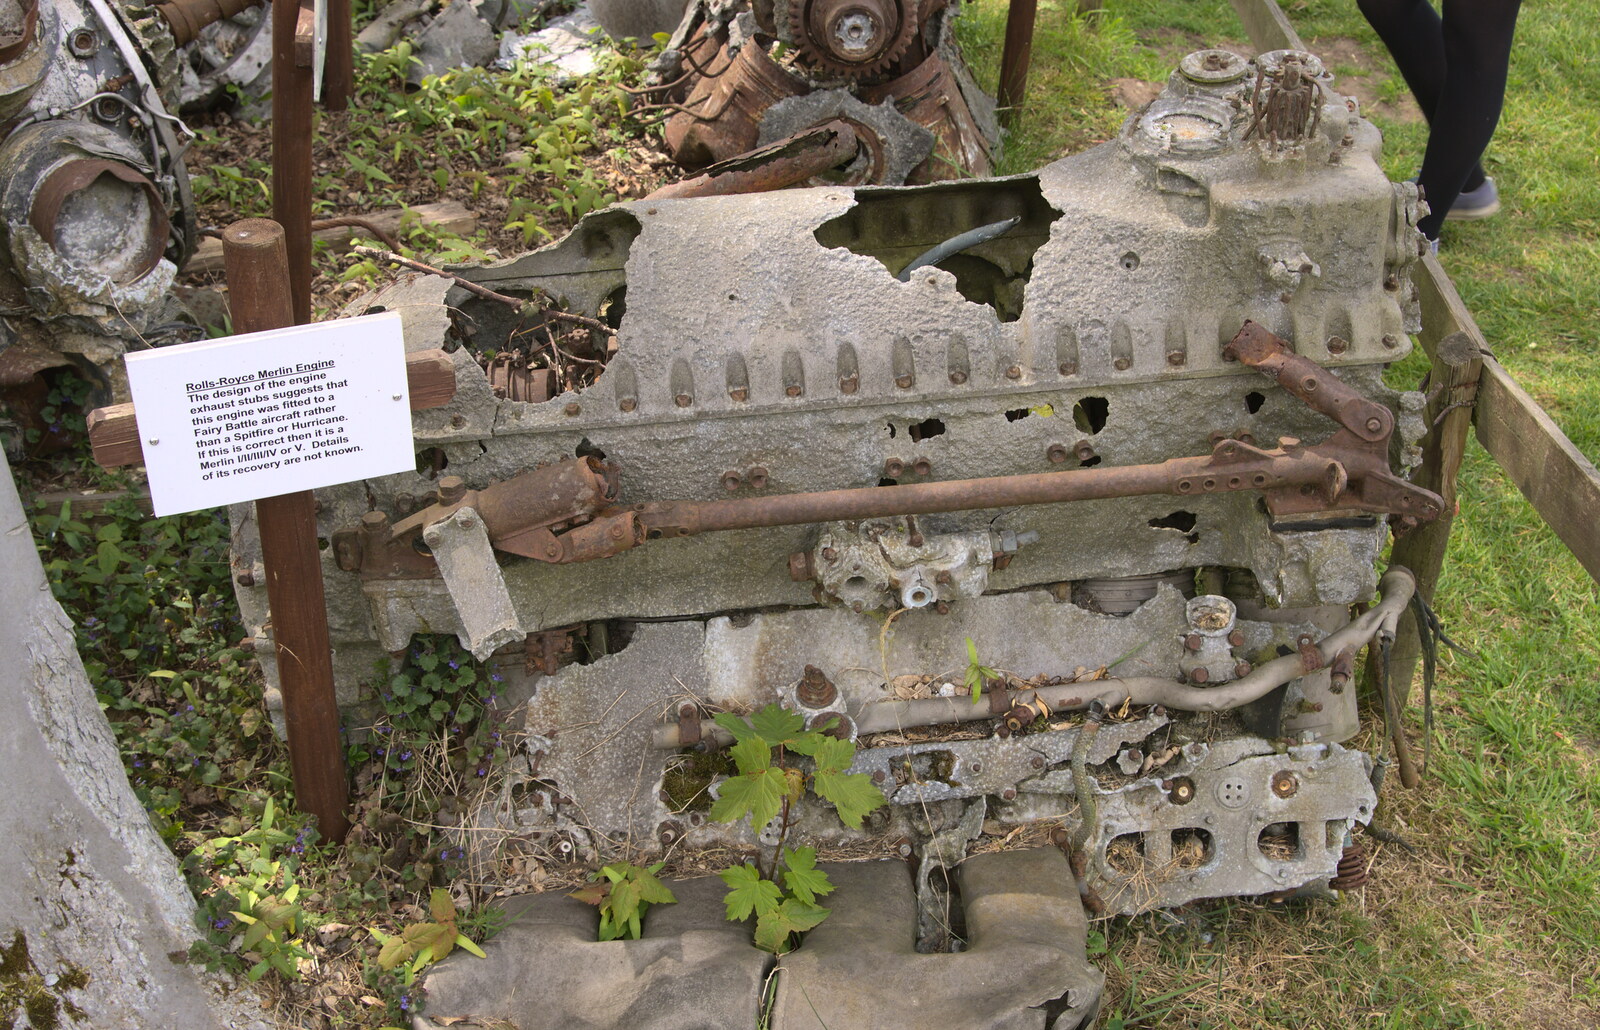 The remains of a Rolls-Royce Merlin from Norfolk and Suffolk Aviation Museum, Flixton, Suffolk - 30th April 2017